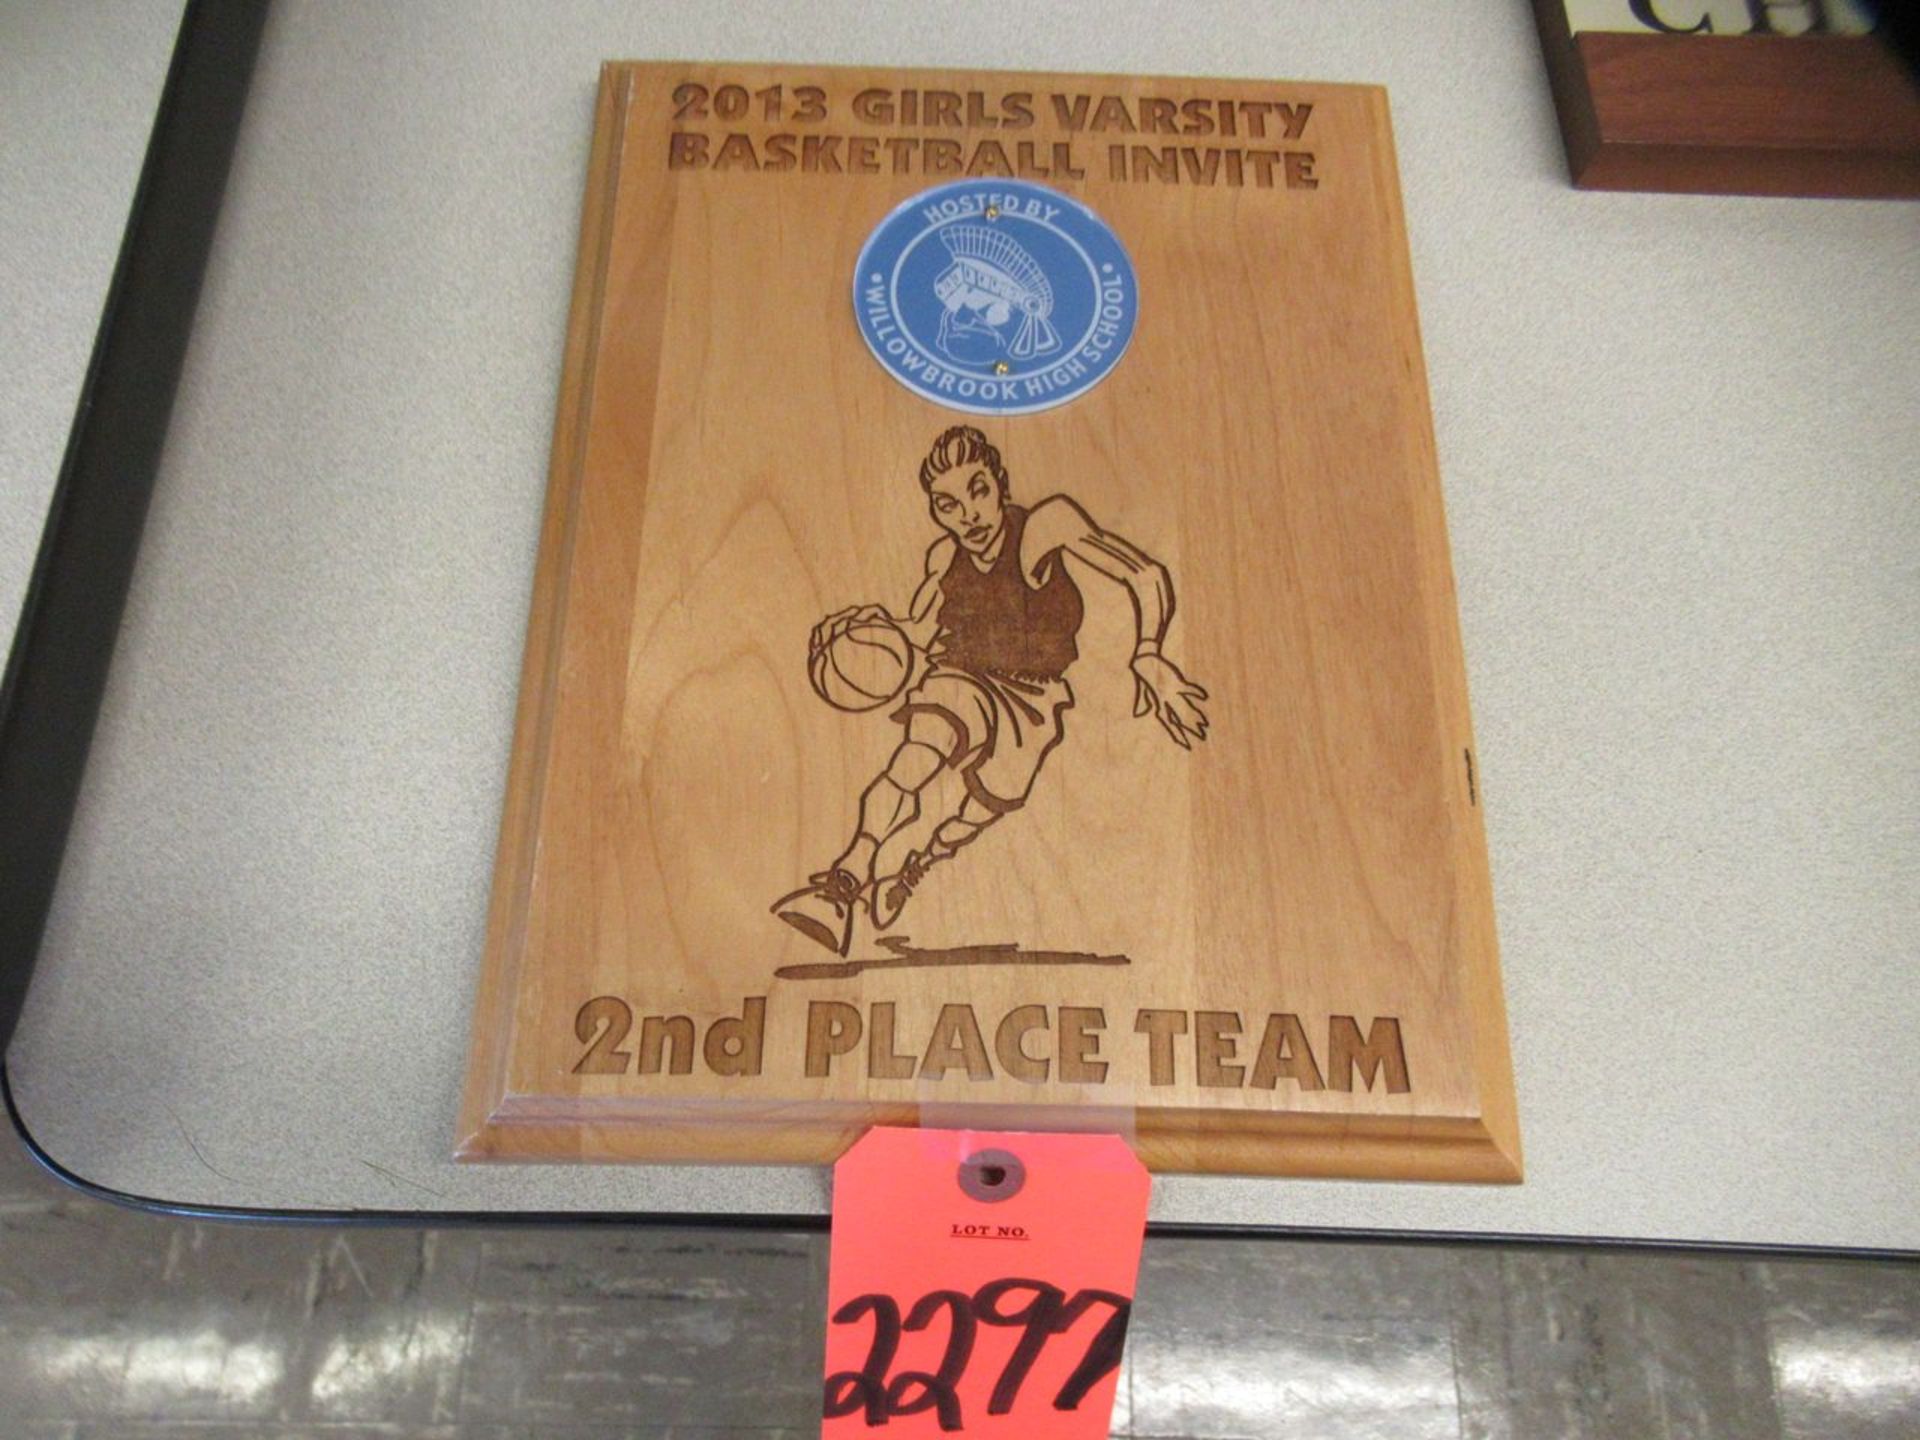 2013 Willowbrook Girls Varsity Basketball Invite Team 2nd Place Plaque (Room 303)